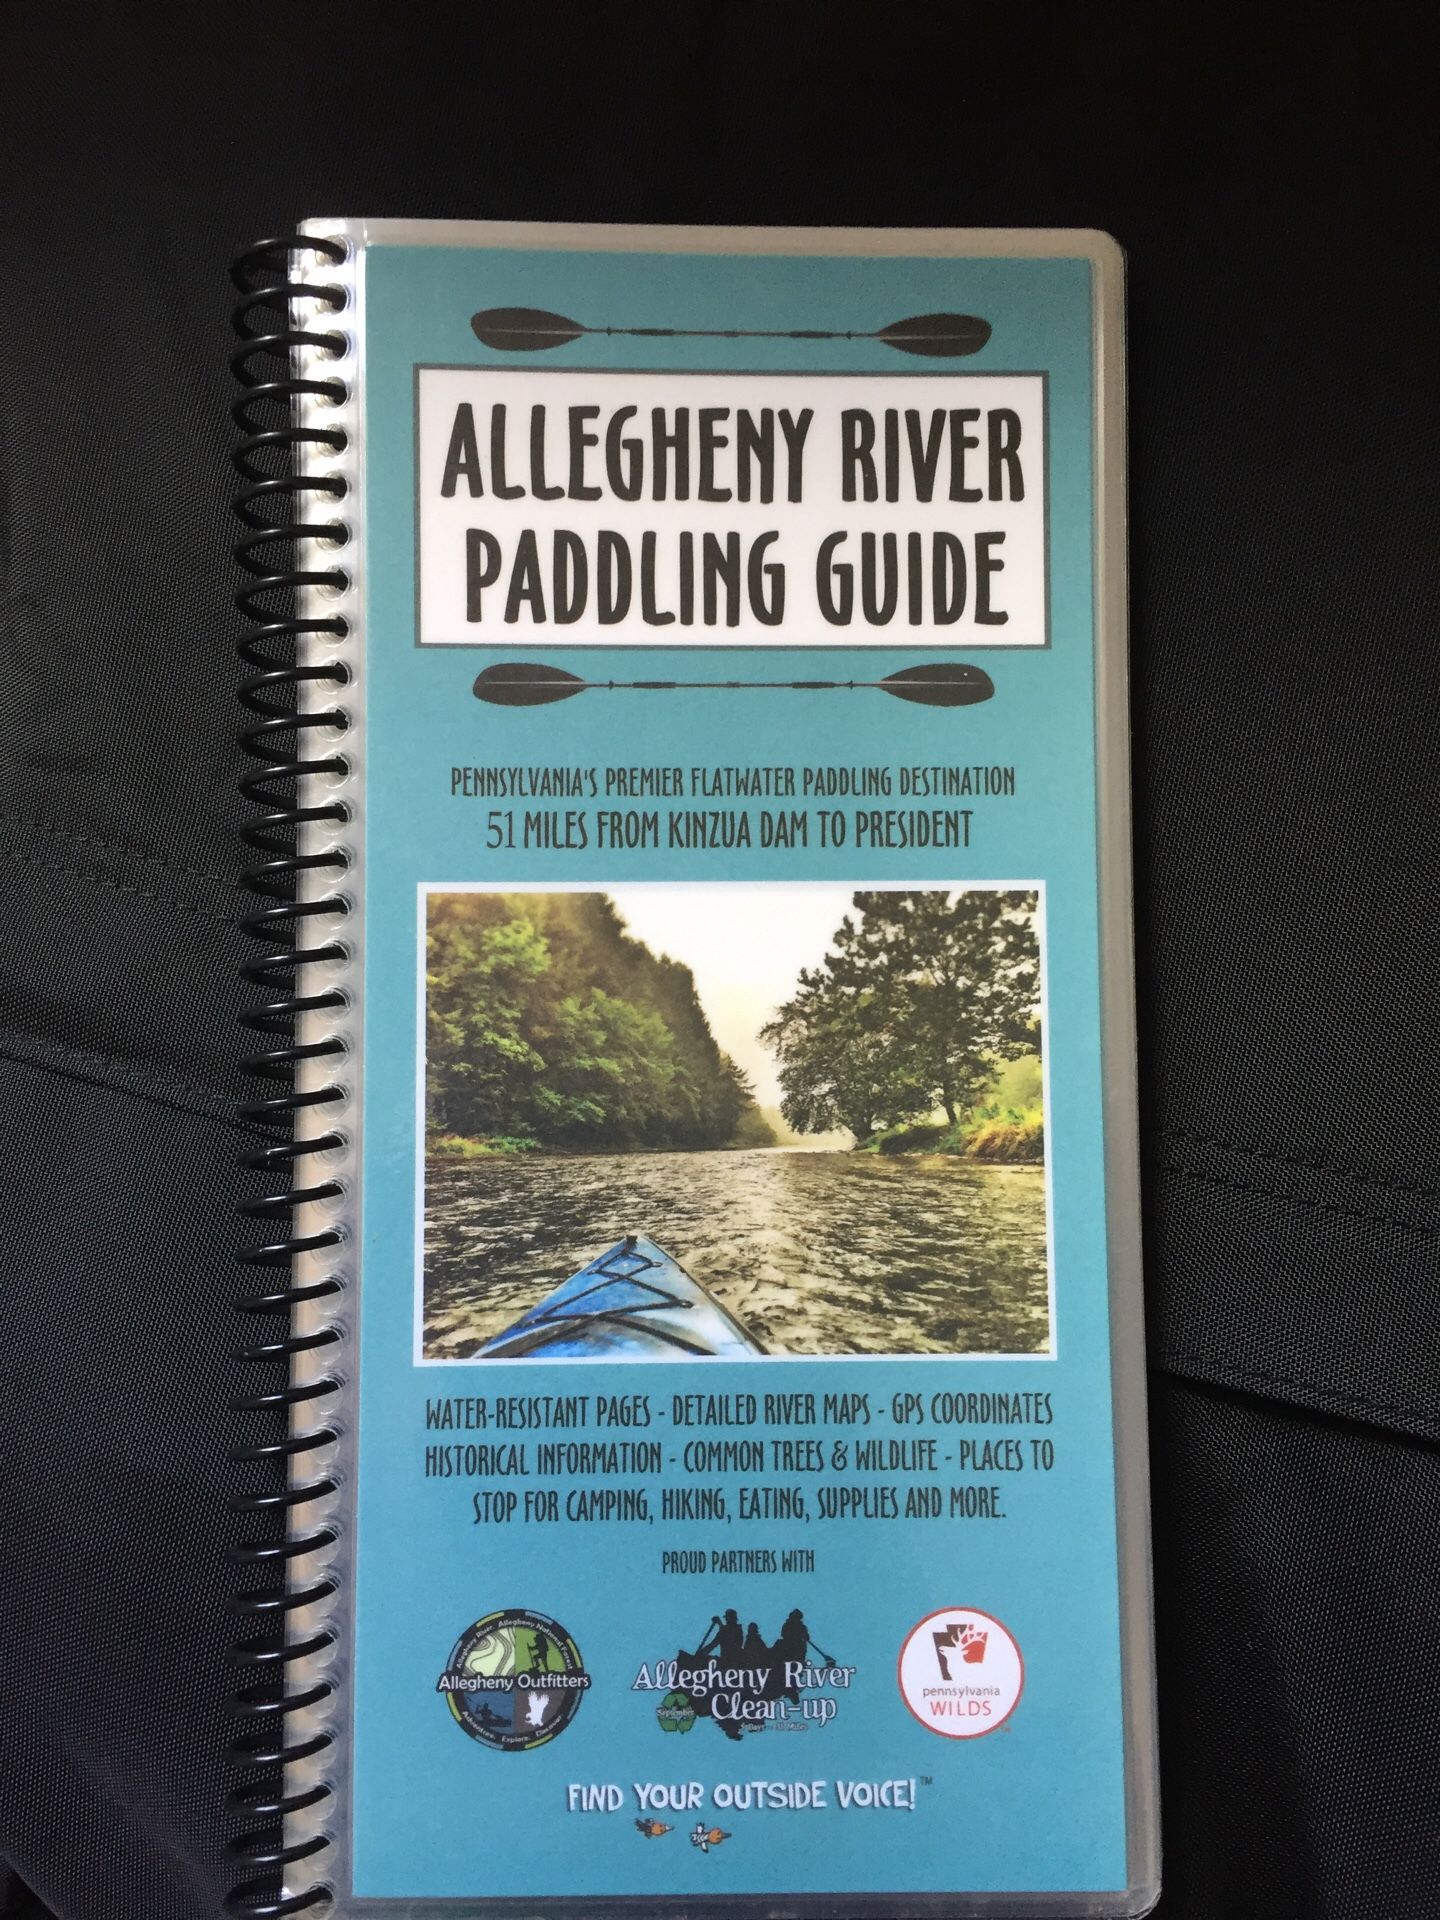 Allegheny River Paddling Guide